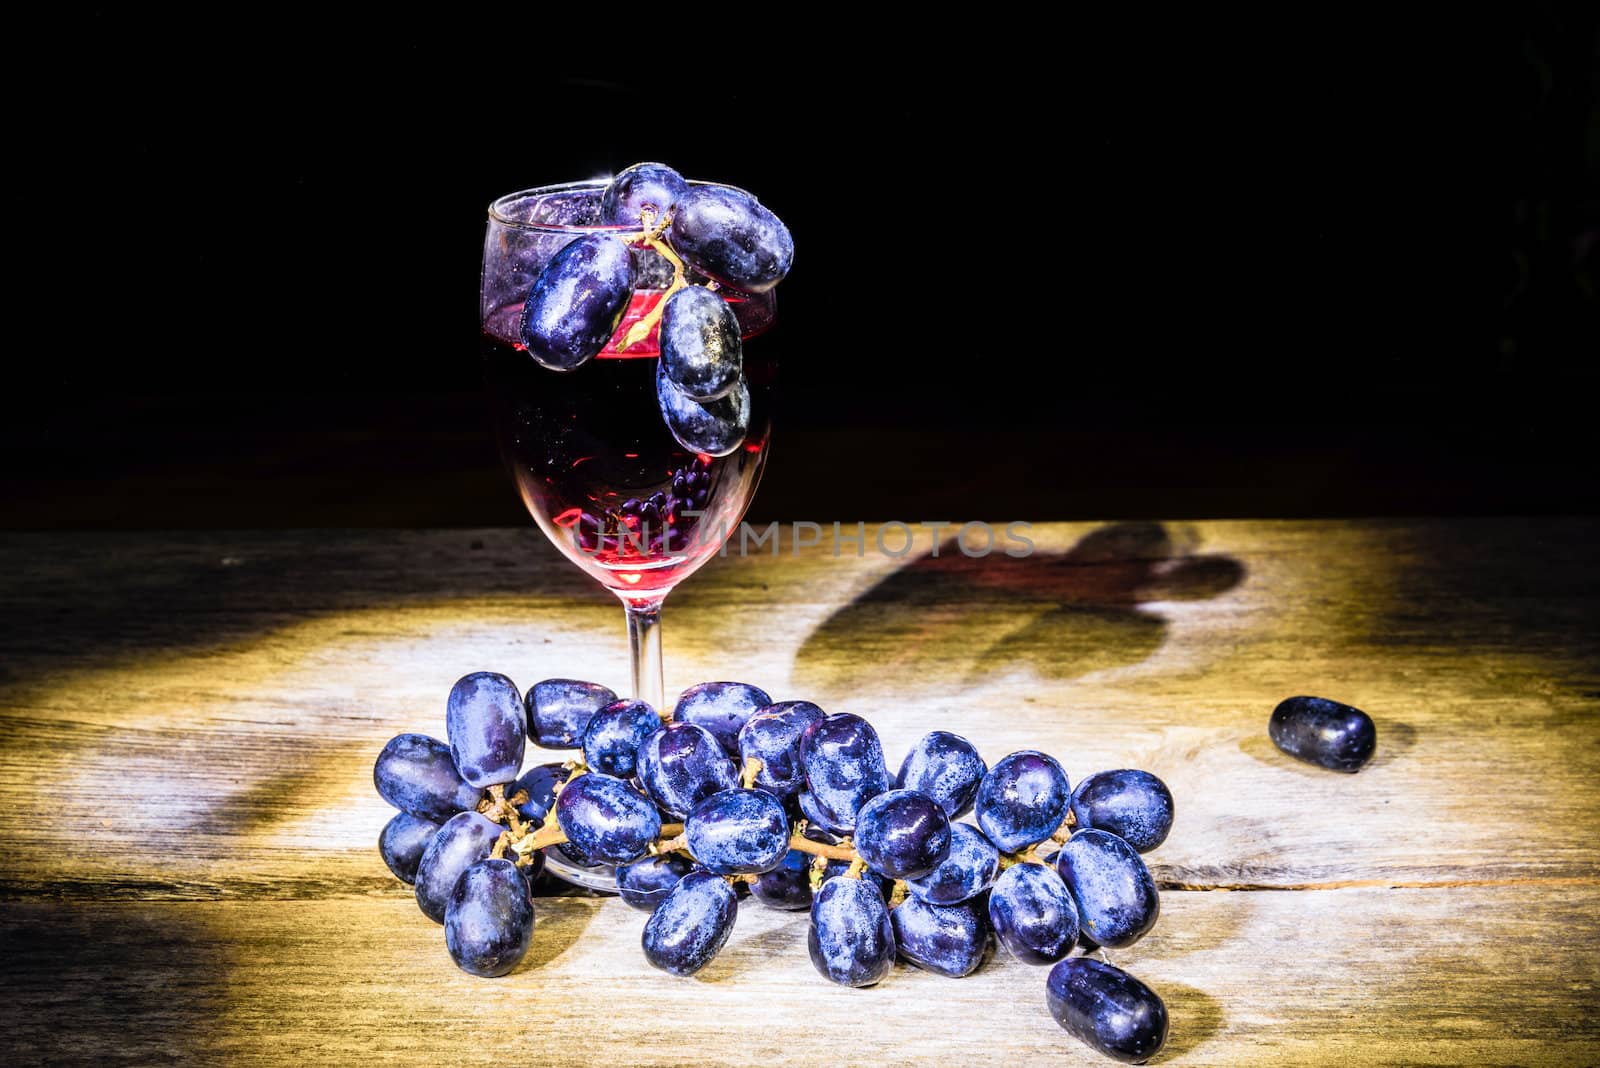  red wine and grape by wmitrmatr